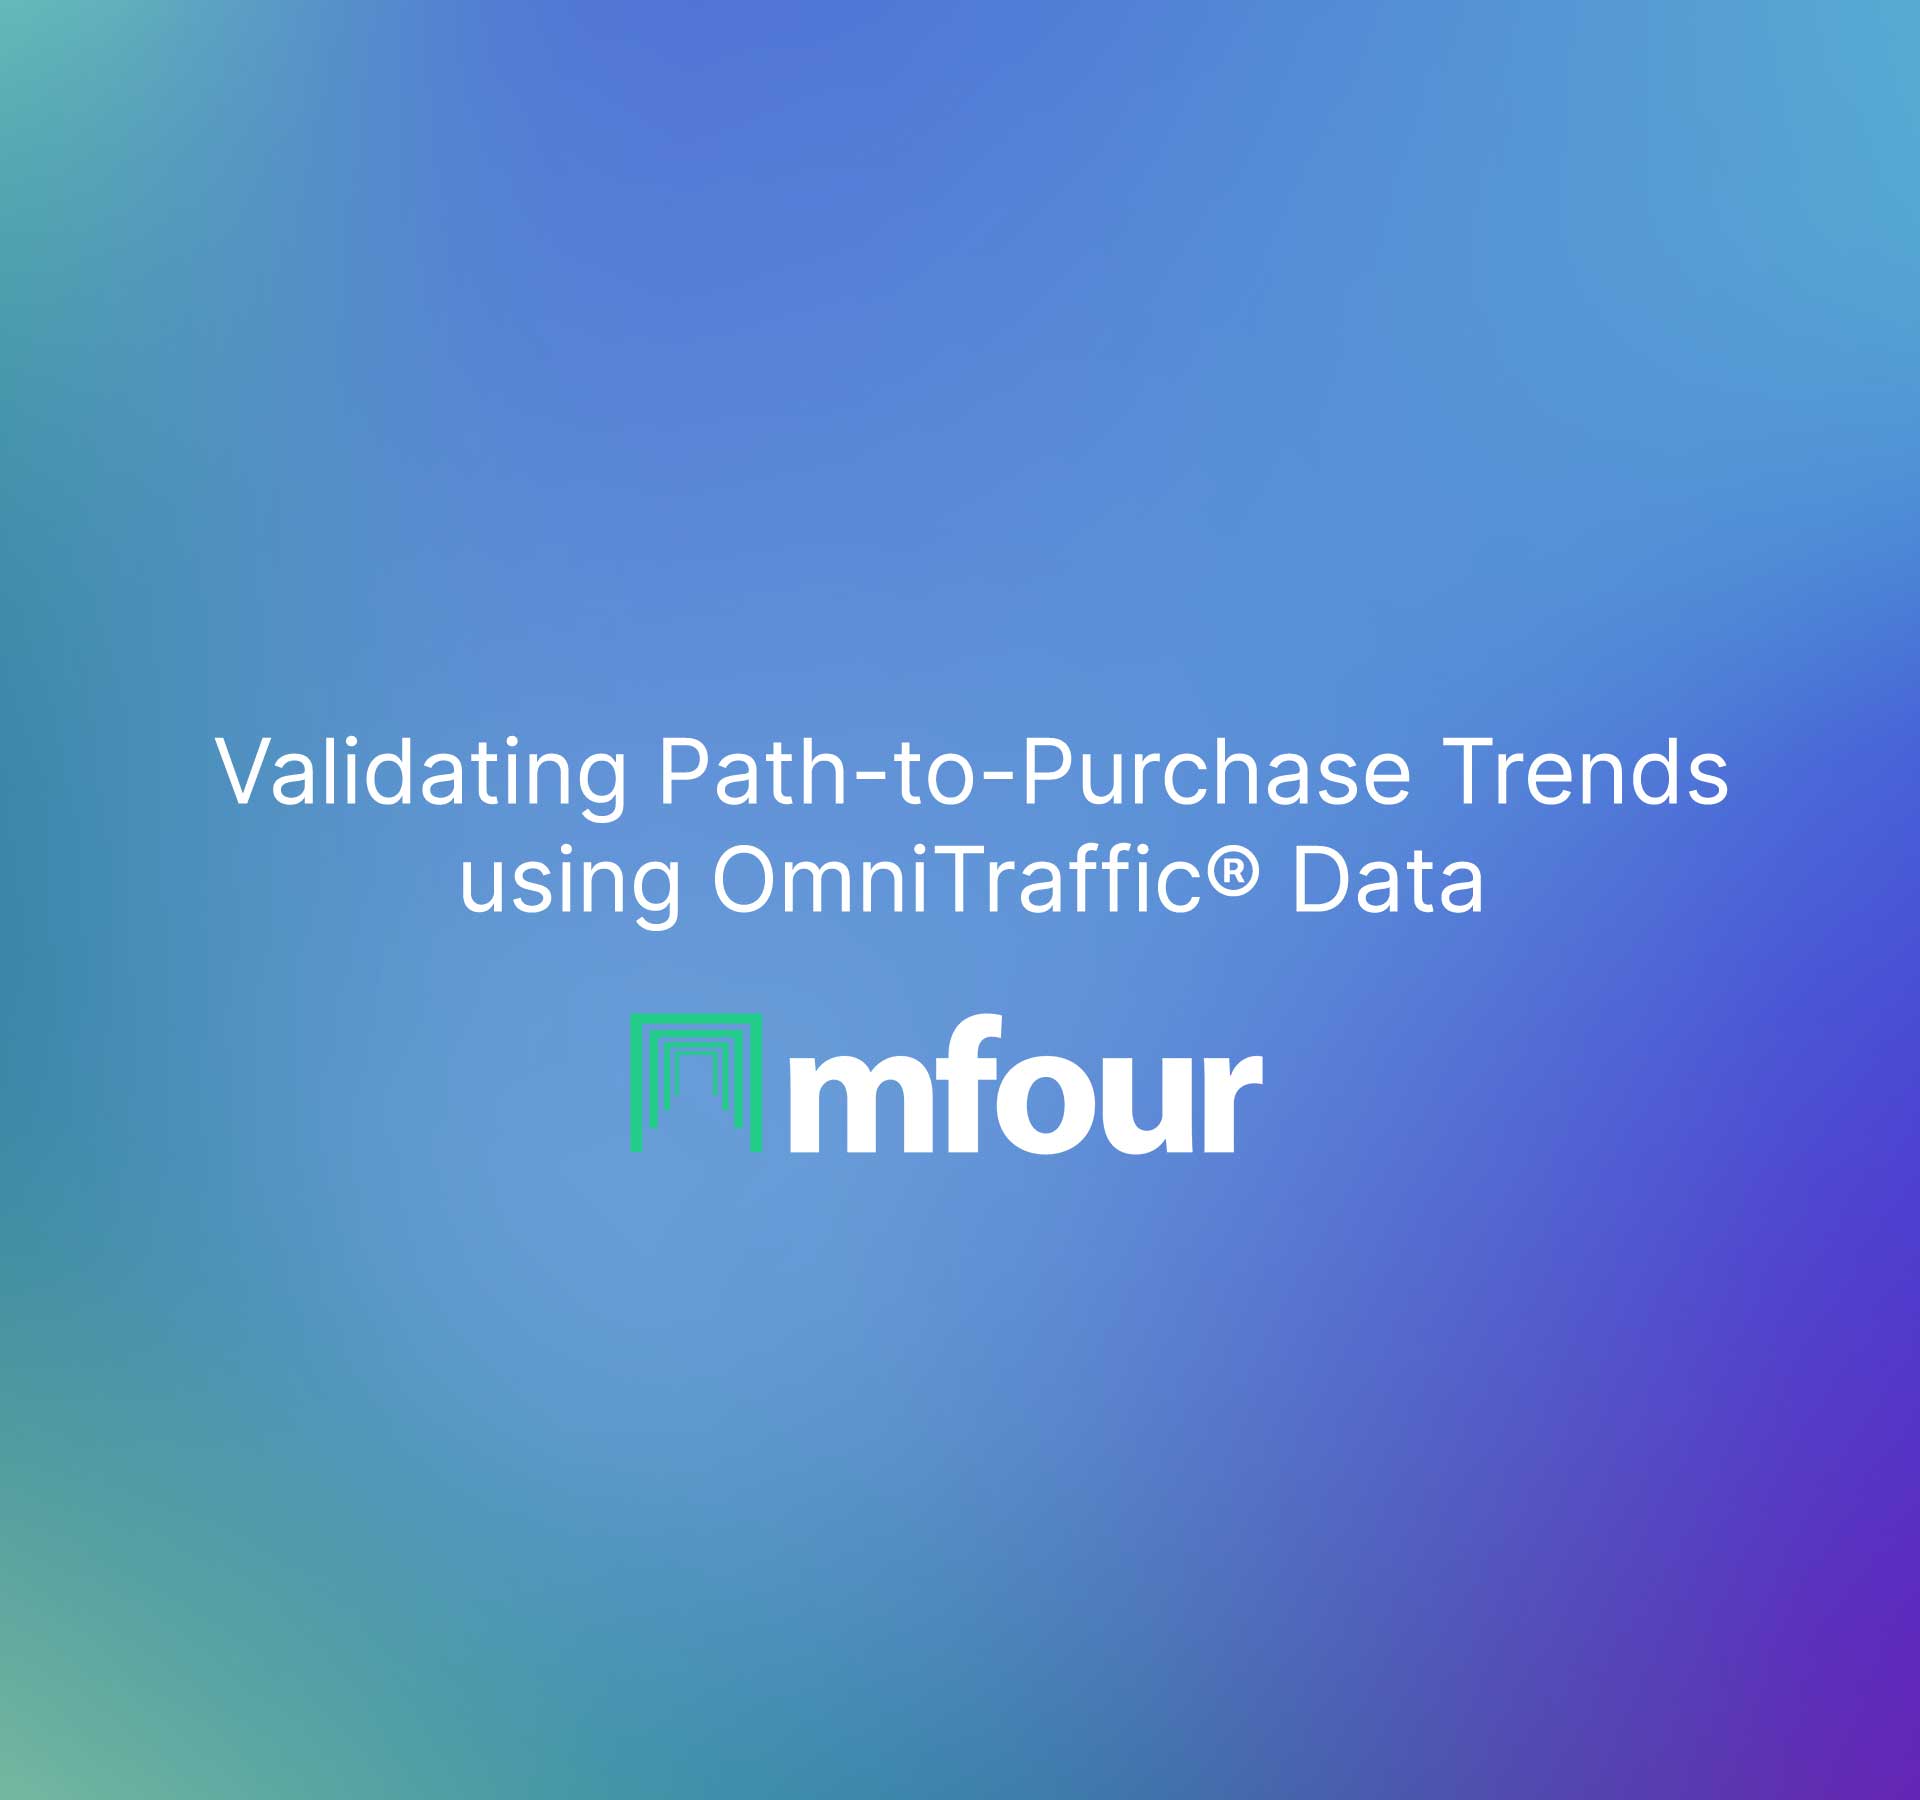 Validating Path-to-Purchase Trends using OmniTraffic® Data.